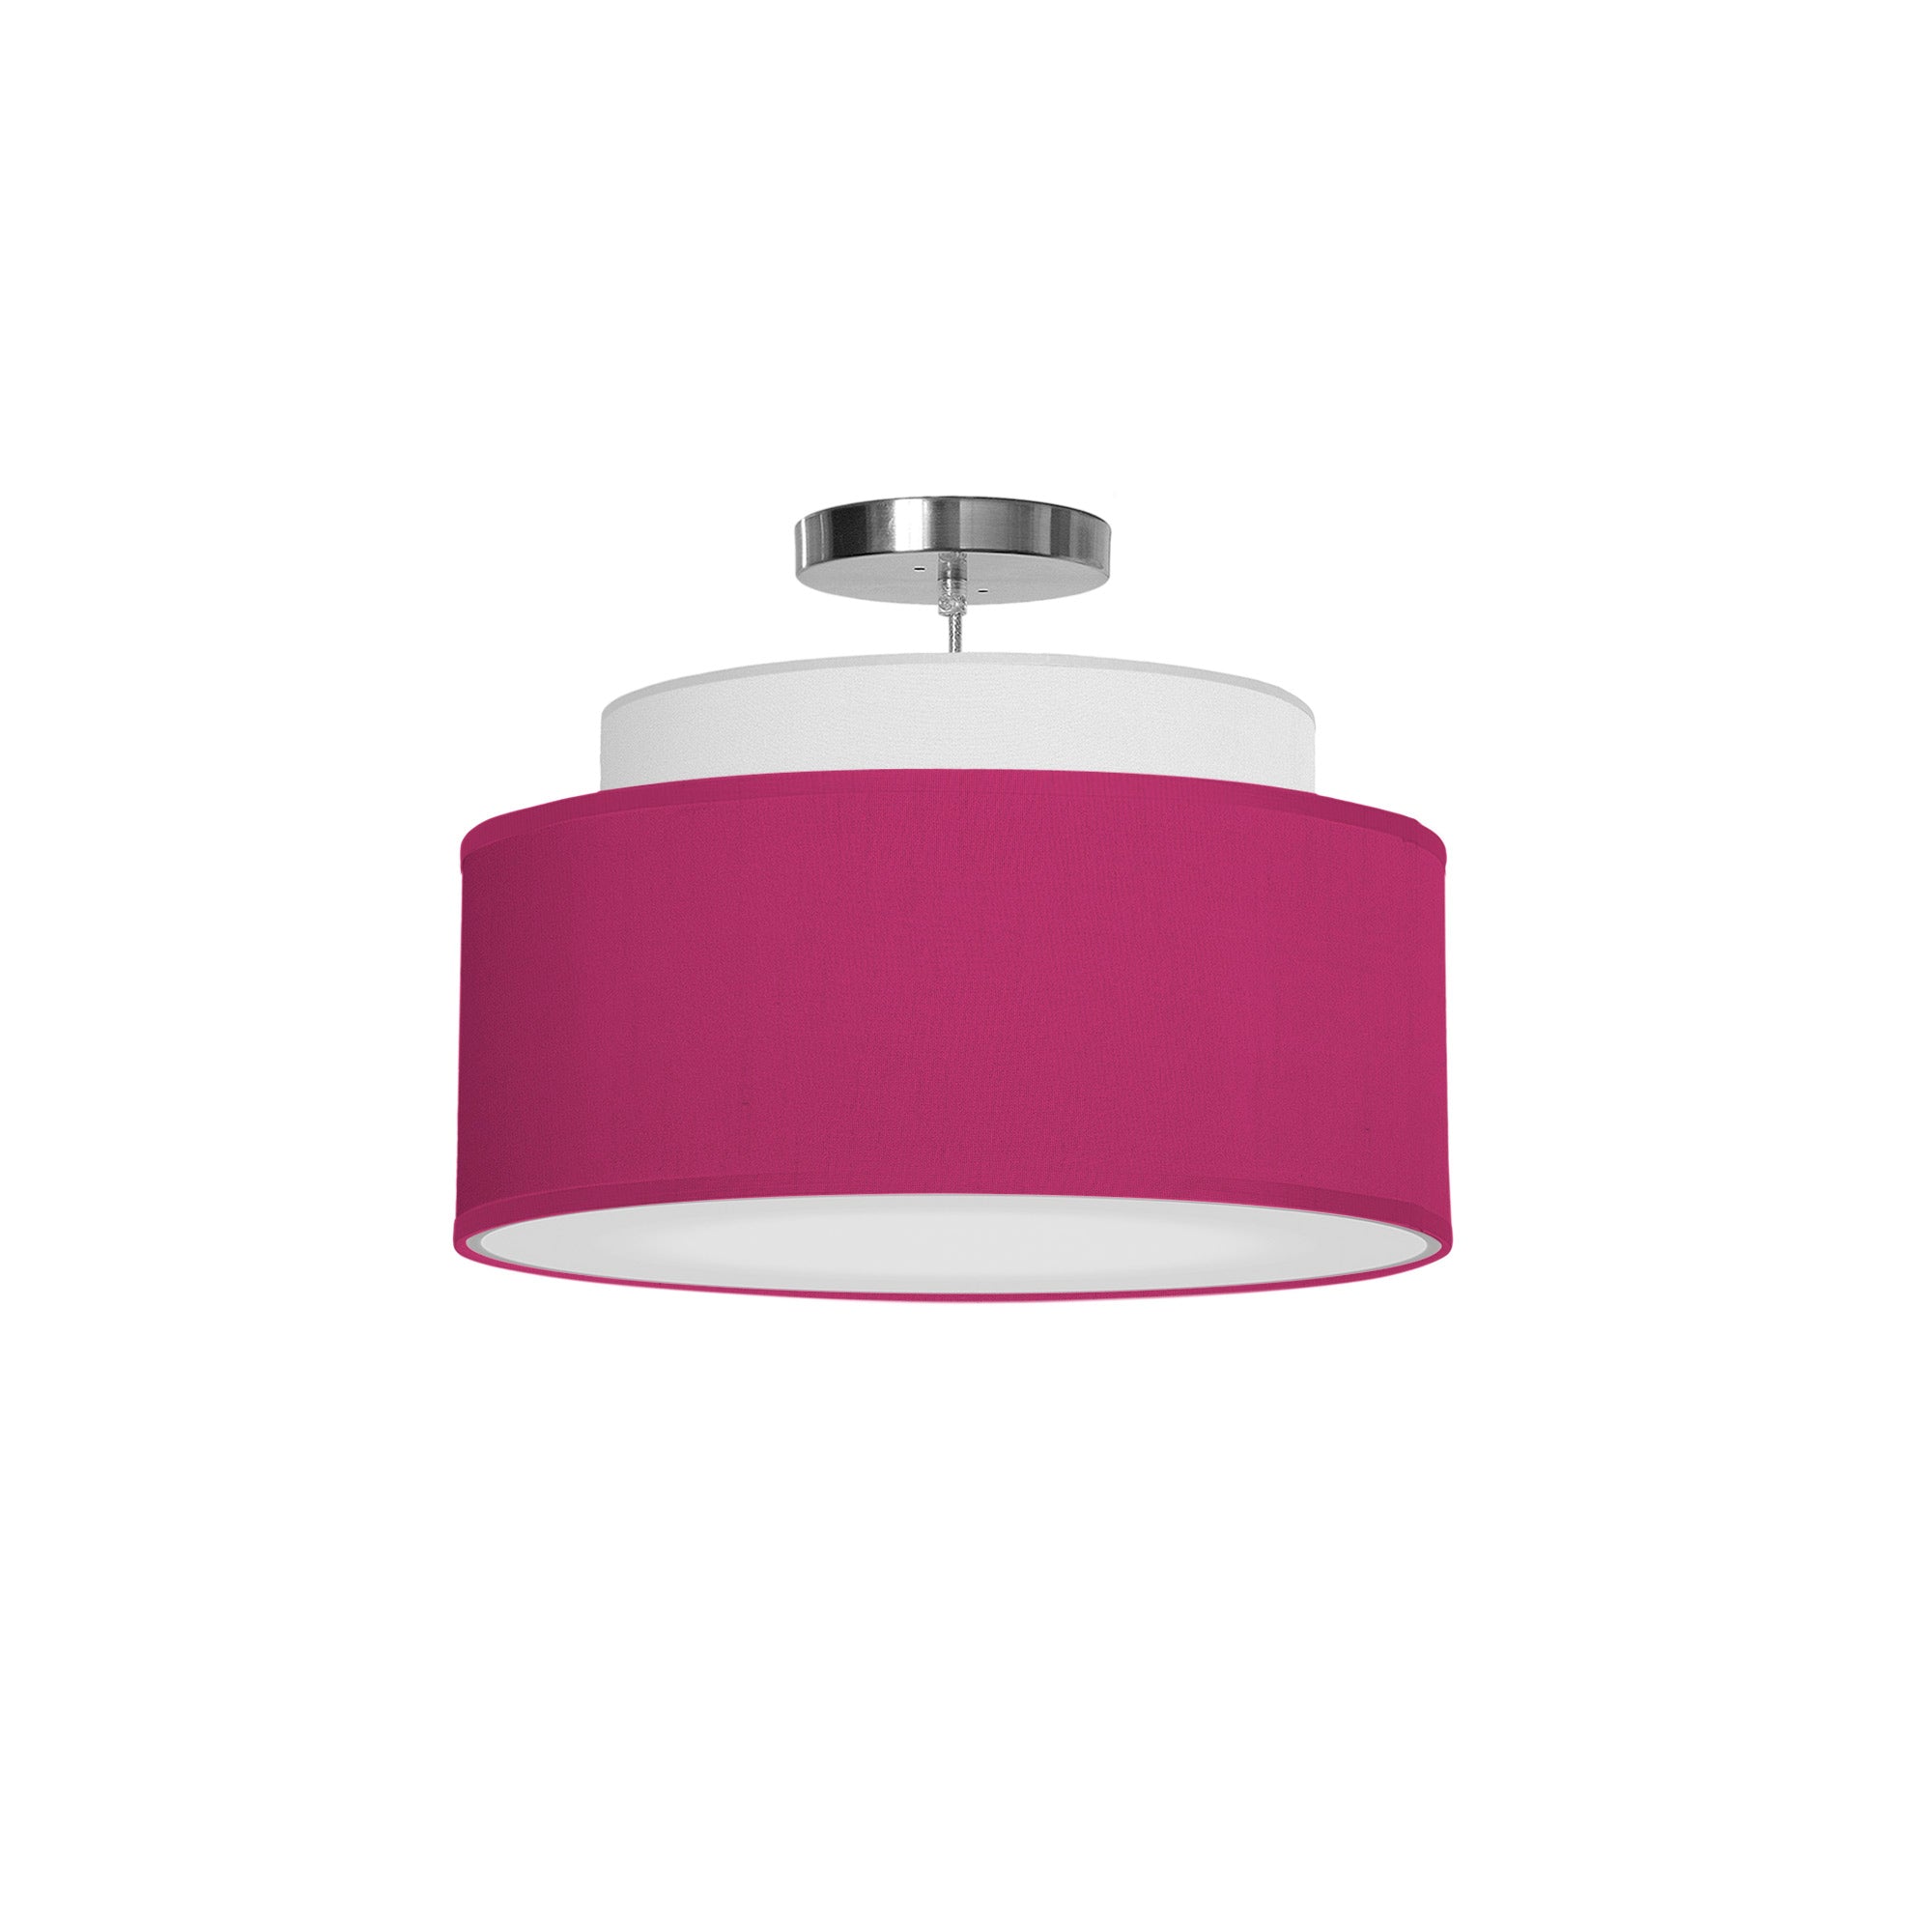 The Elsa Hanging Lamp from Seascape Fixtures with a silk shade in berry color.